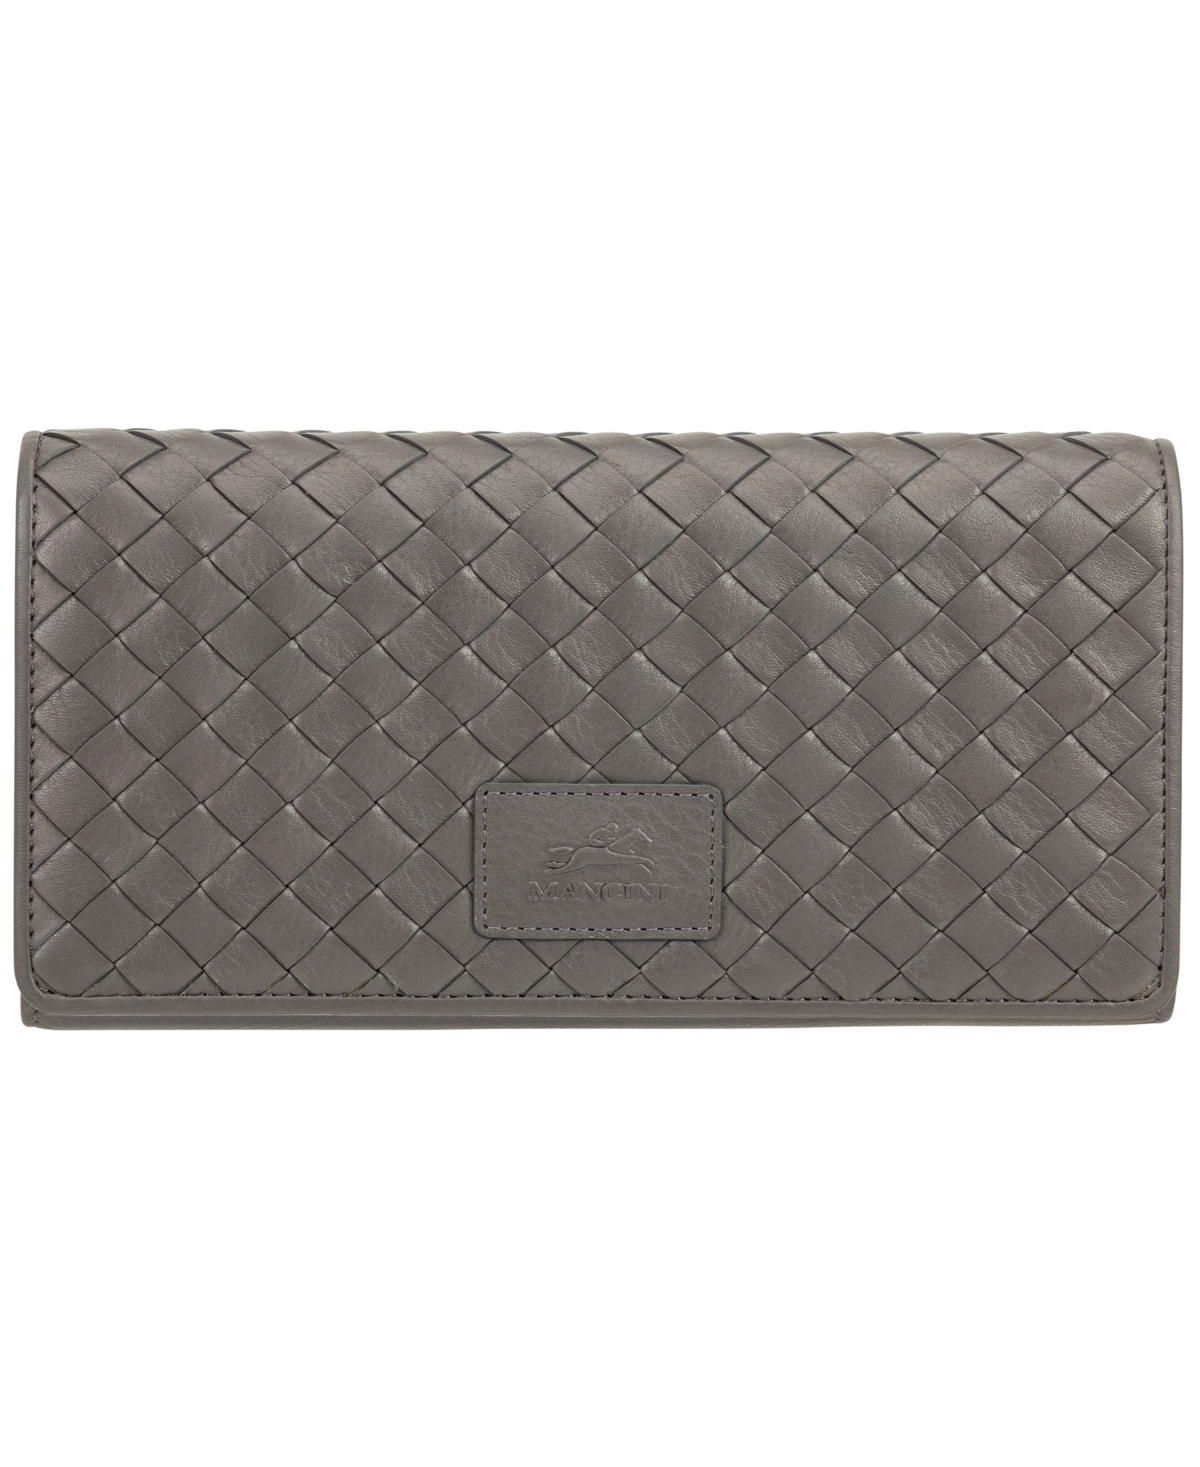 Women's Basket Weave Collection Rfid Secure Trifold Wallet - Gray